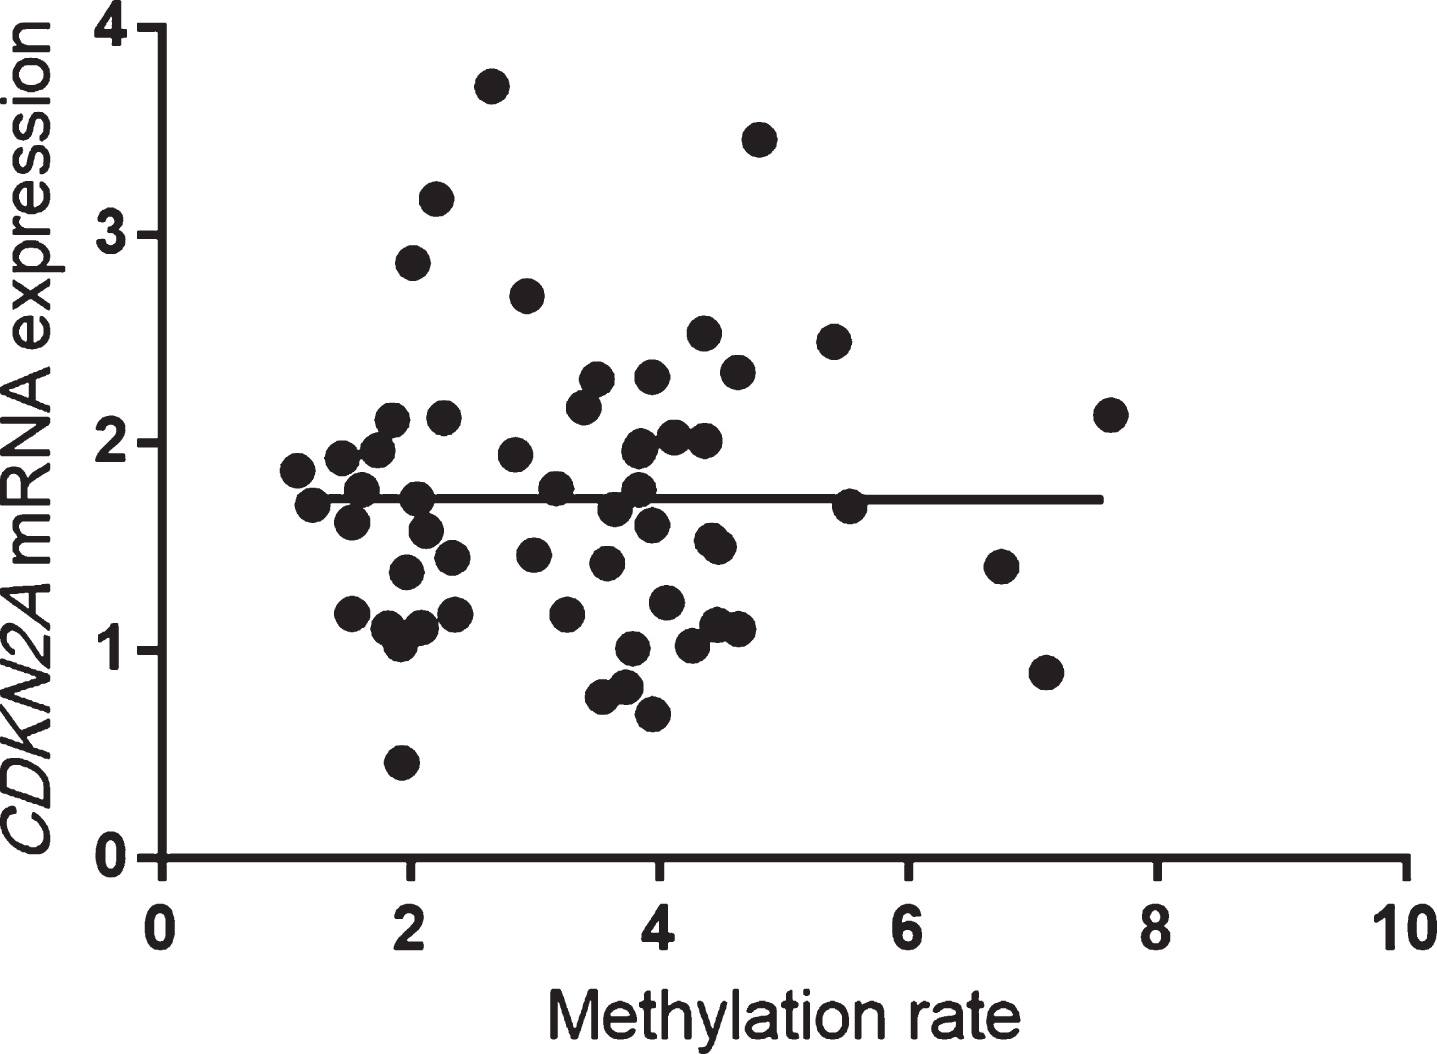 Mean methylation rates of all sites were not significantly correlated with CDKN2A mRNA expression in HCs (Spearman’s rank correlation coefficient: r = 0.02, p = 0.87). HCs, healthy control subjects.